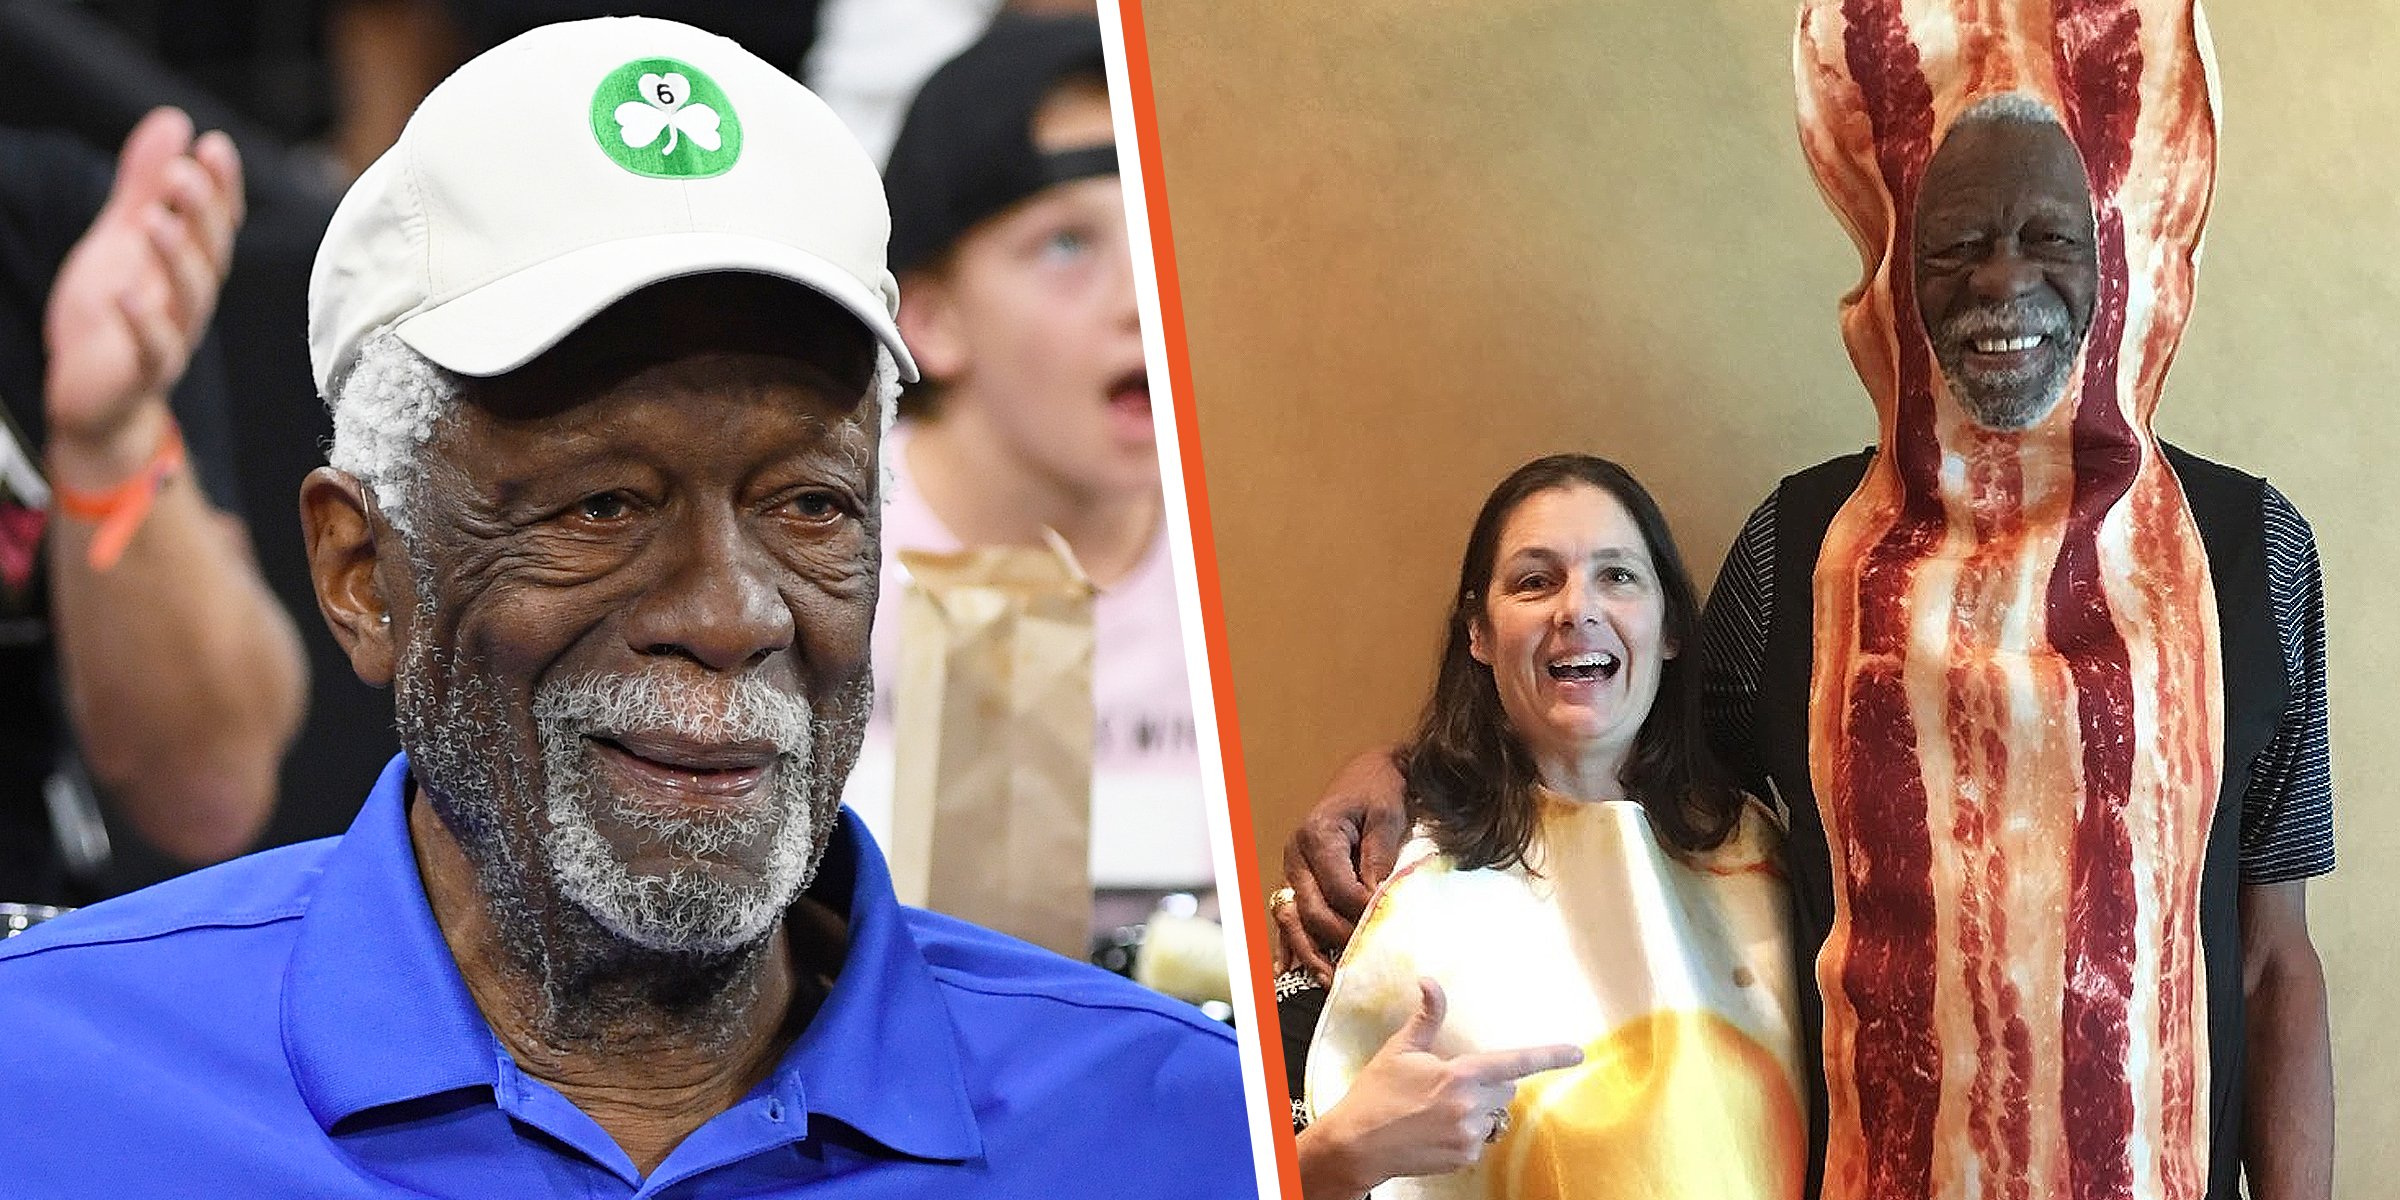 Instagram/realbillrussell  | Getty Images 